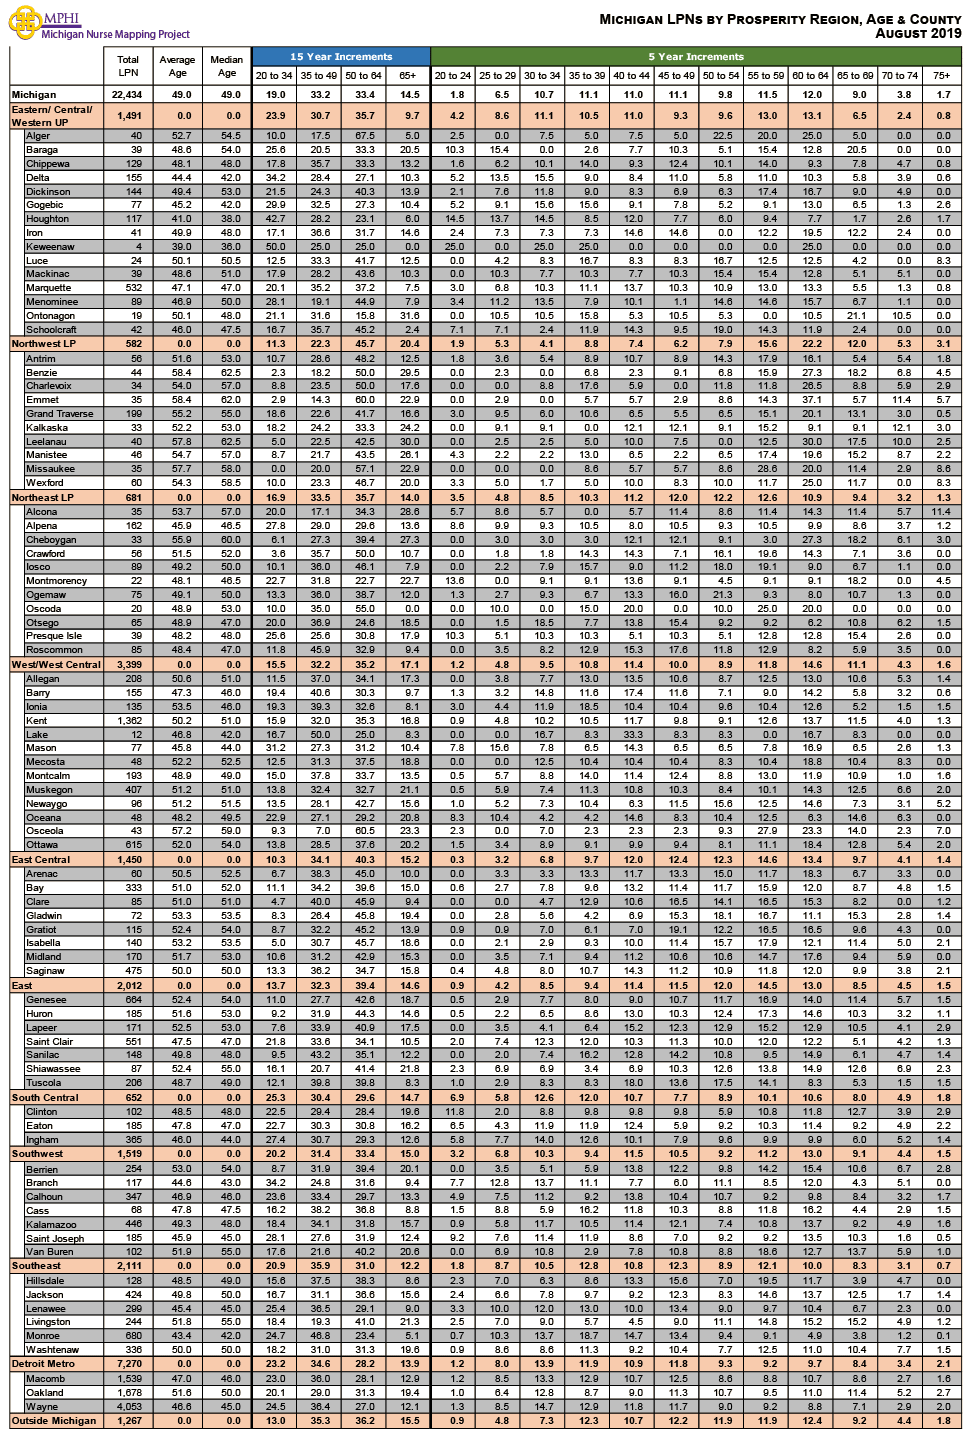 table depicting Michigan's Licensed Practical Nurses by age groups, county and prosperity regions in 2019